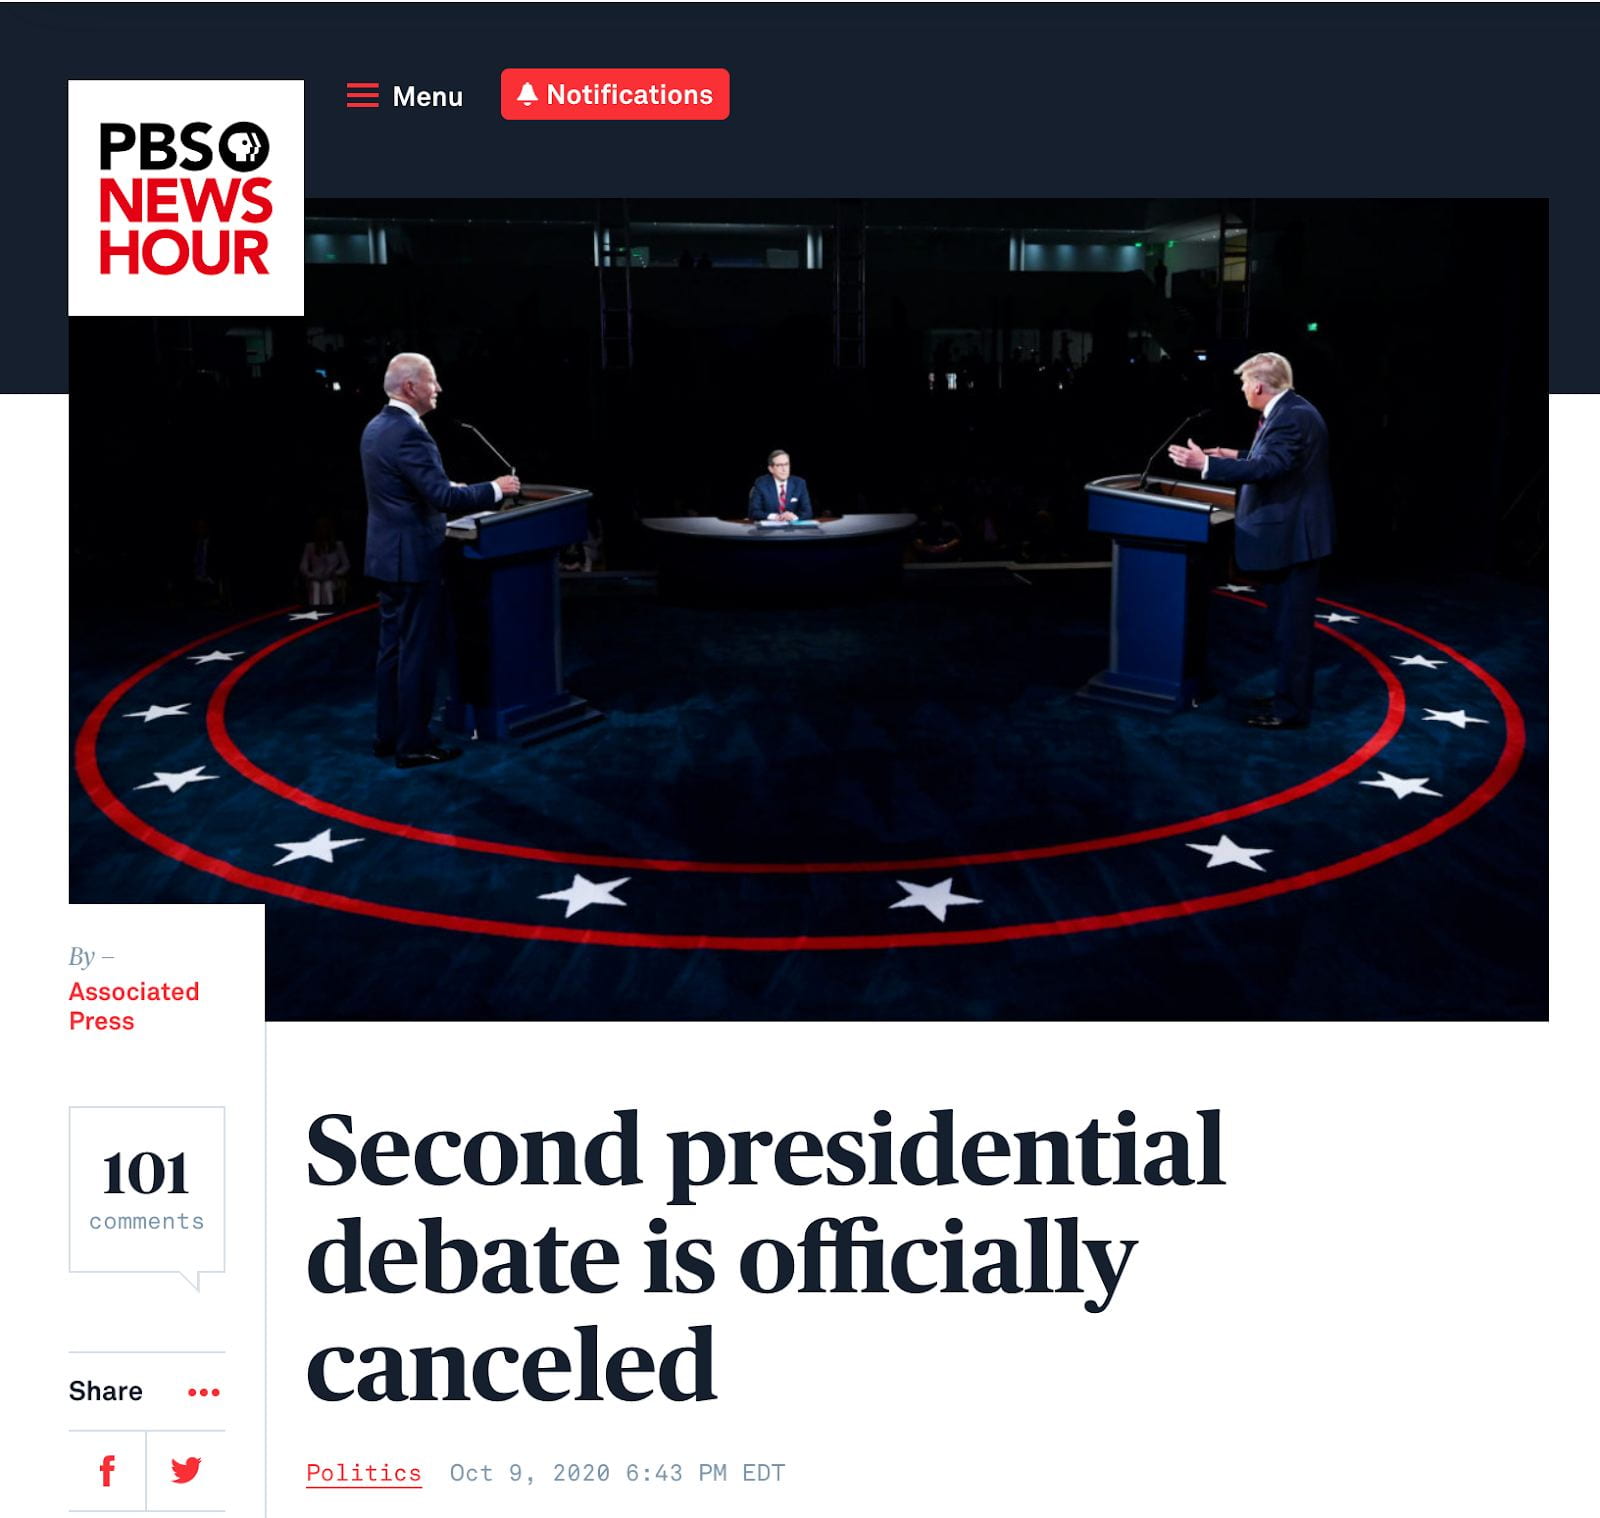 PBS headline stating, "Second presidential debate is officially cancelled"